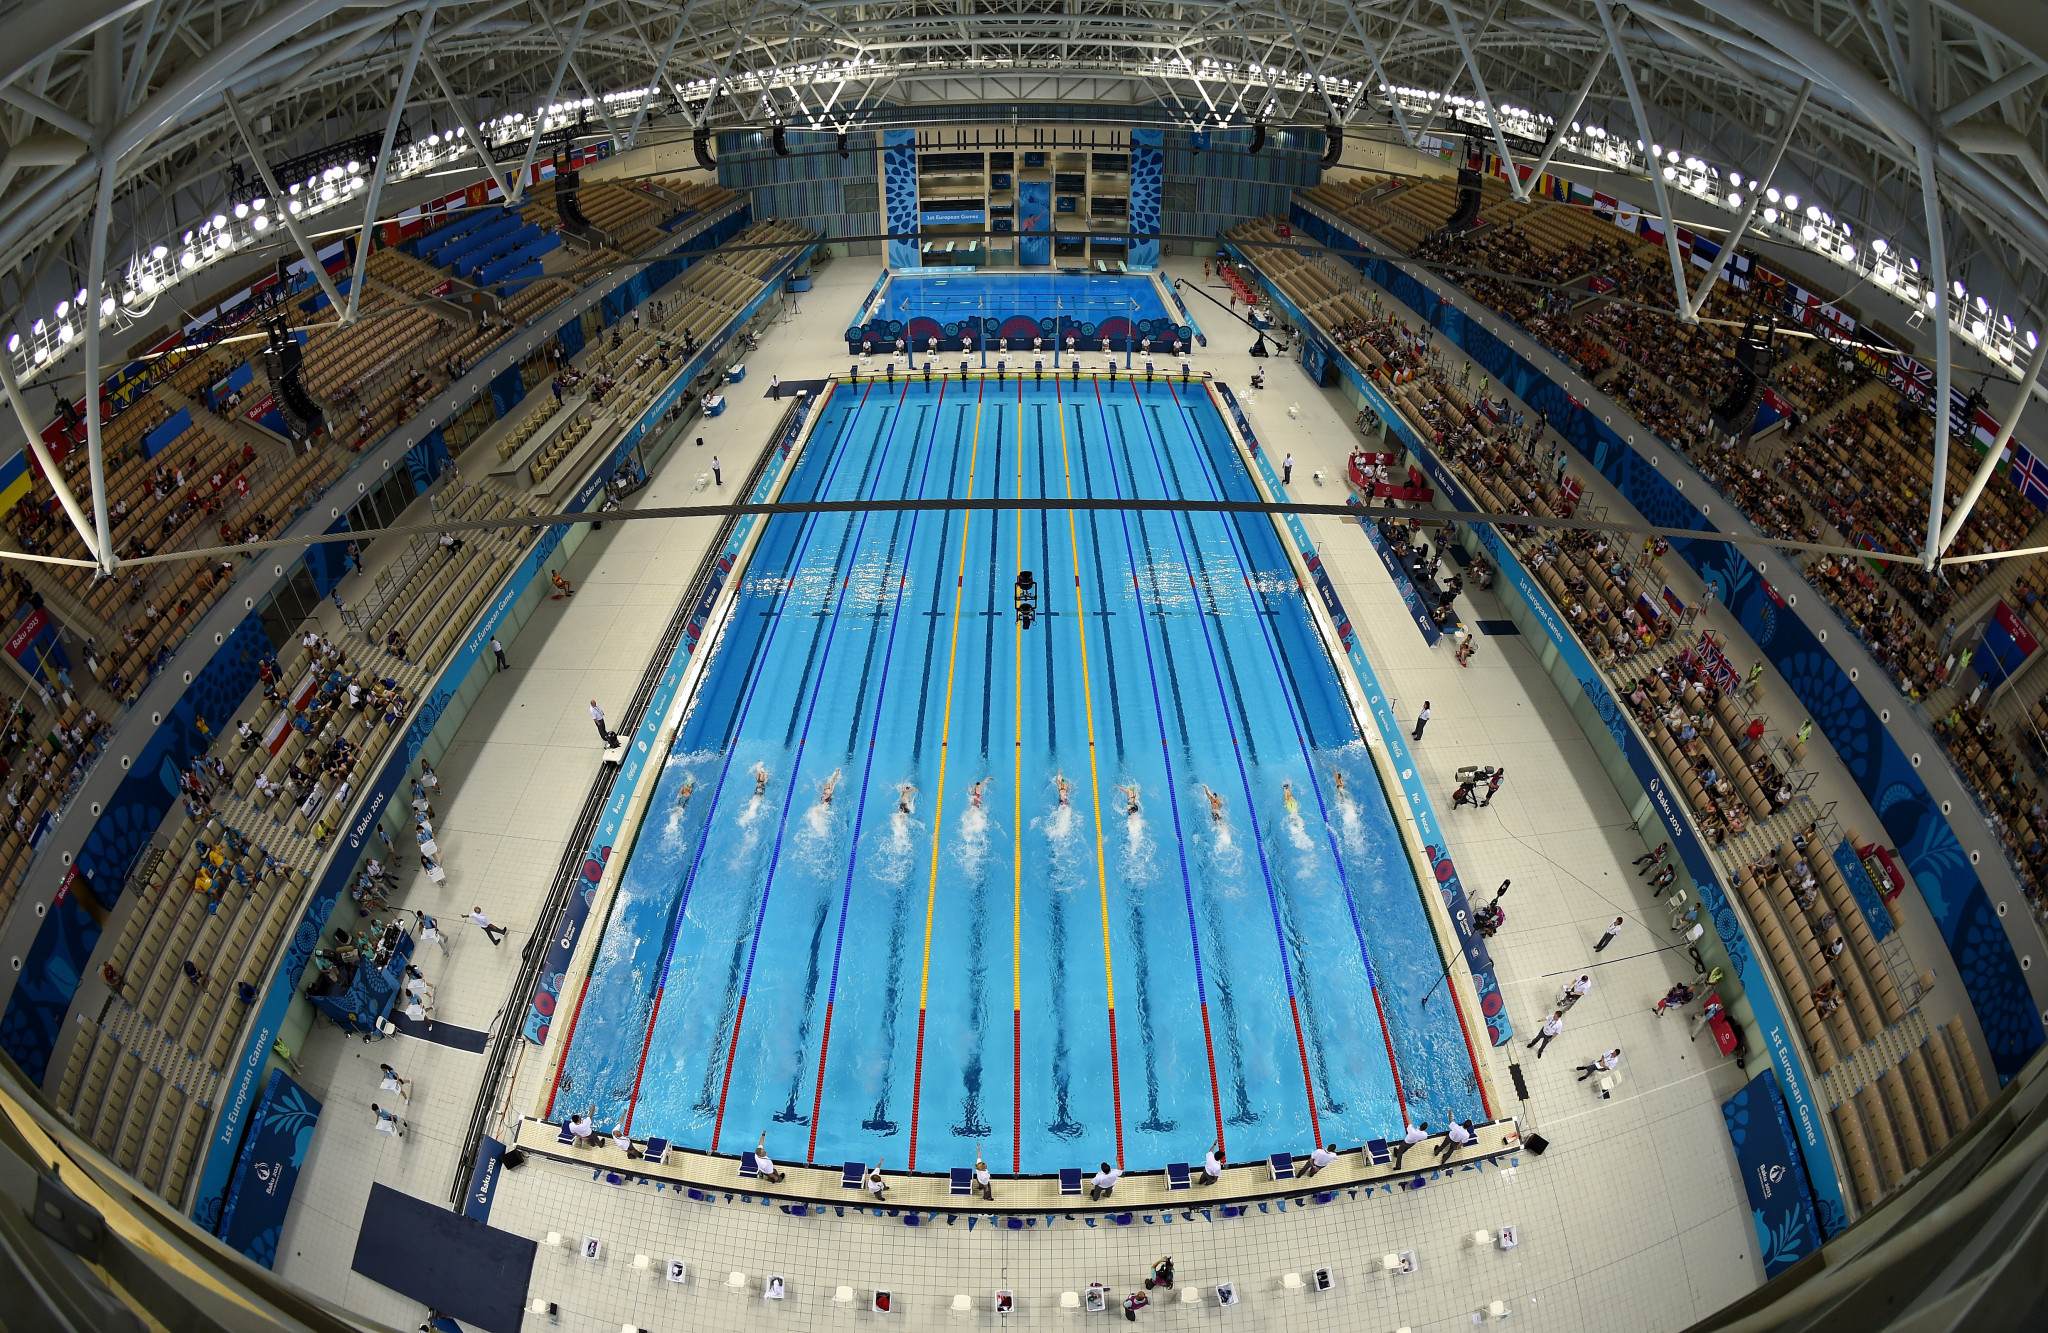 The Aquatics Palace is a world-class swimming and diving facility ©Getty Images